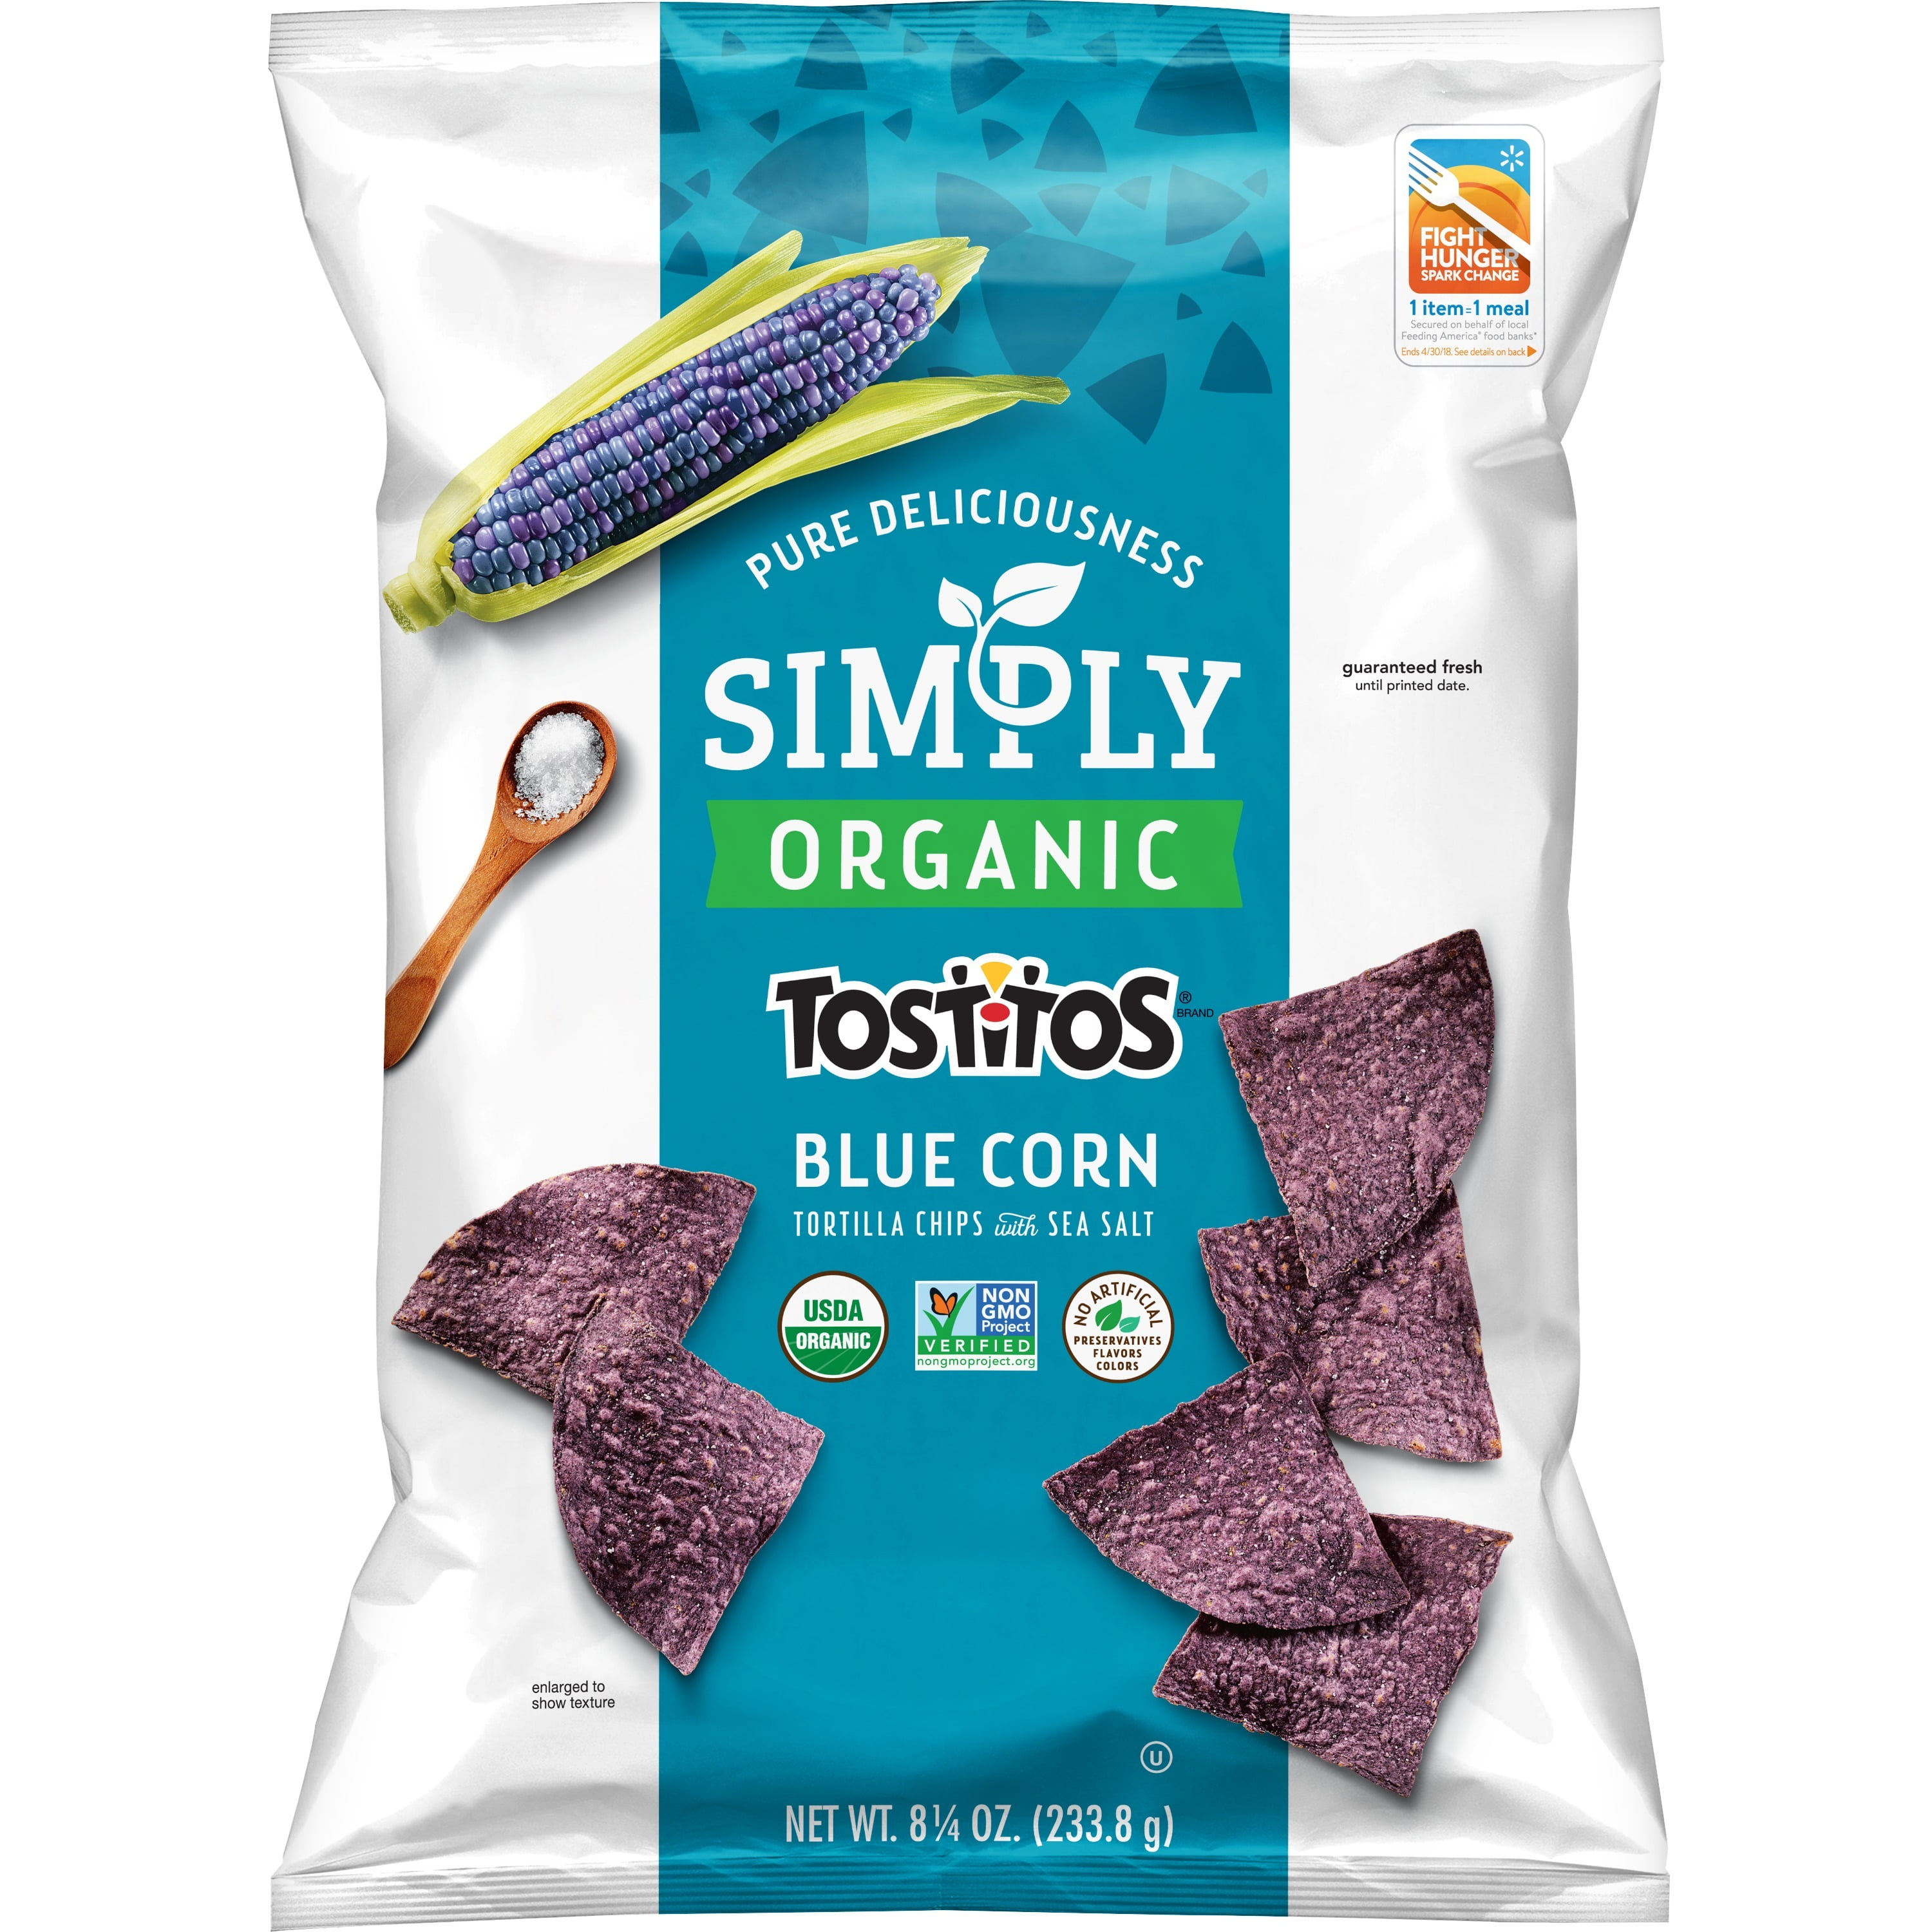 is blue corn chips good for you